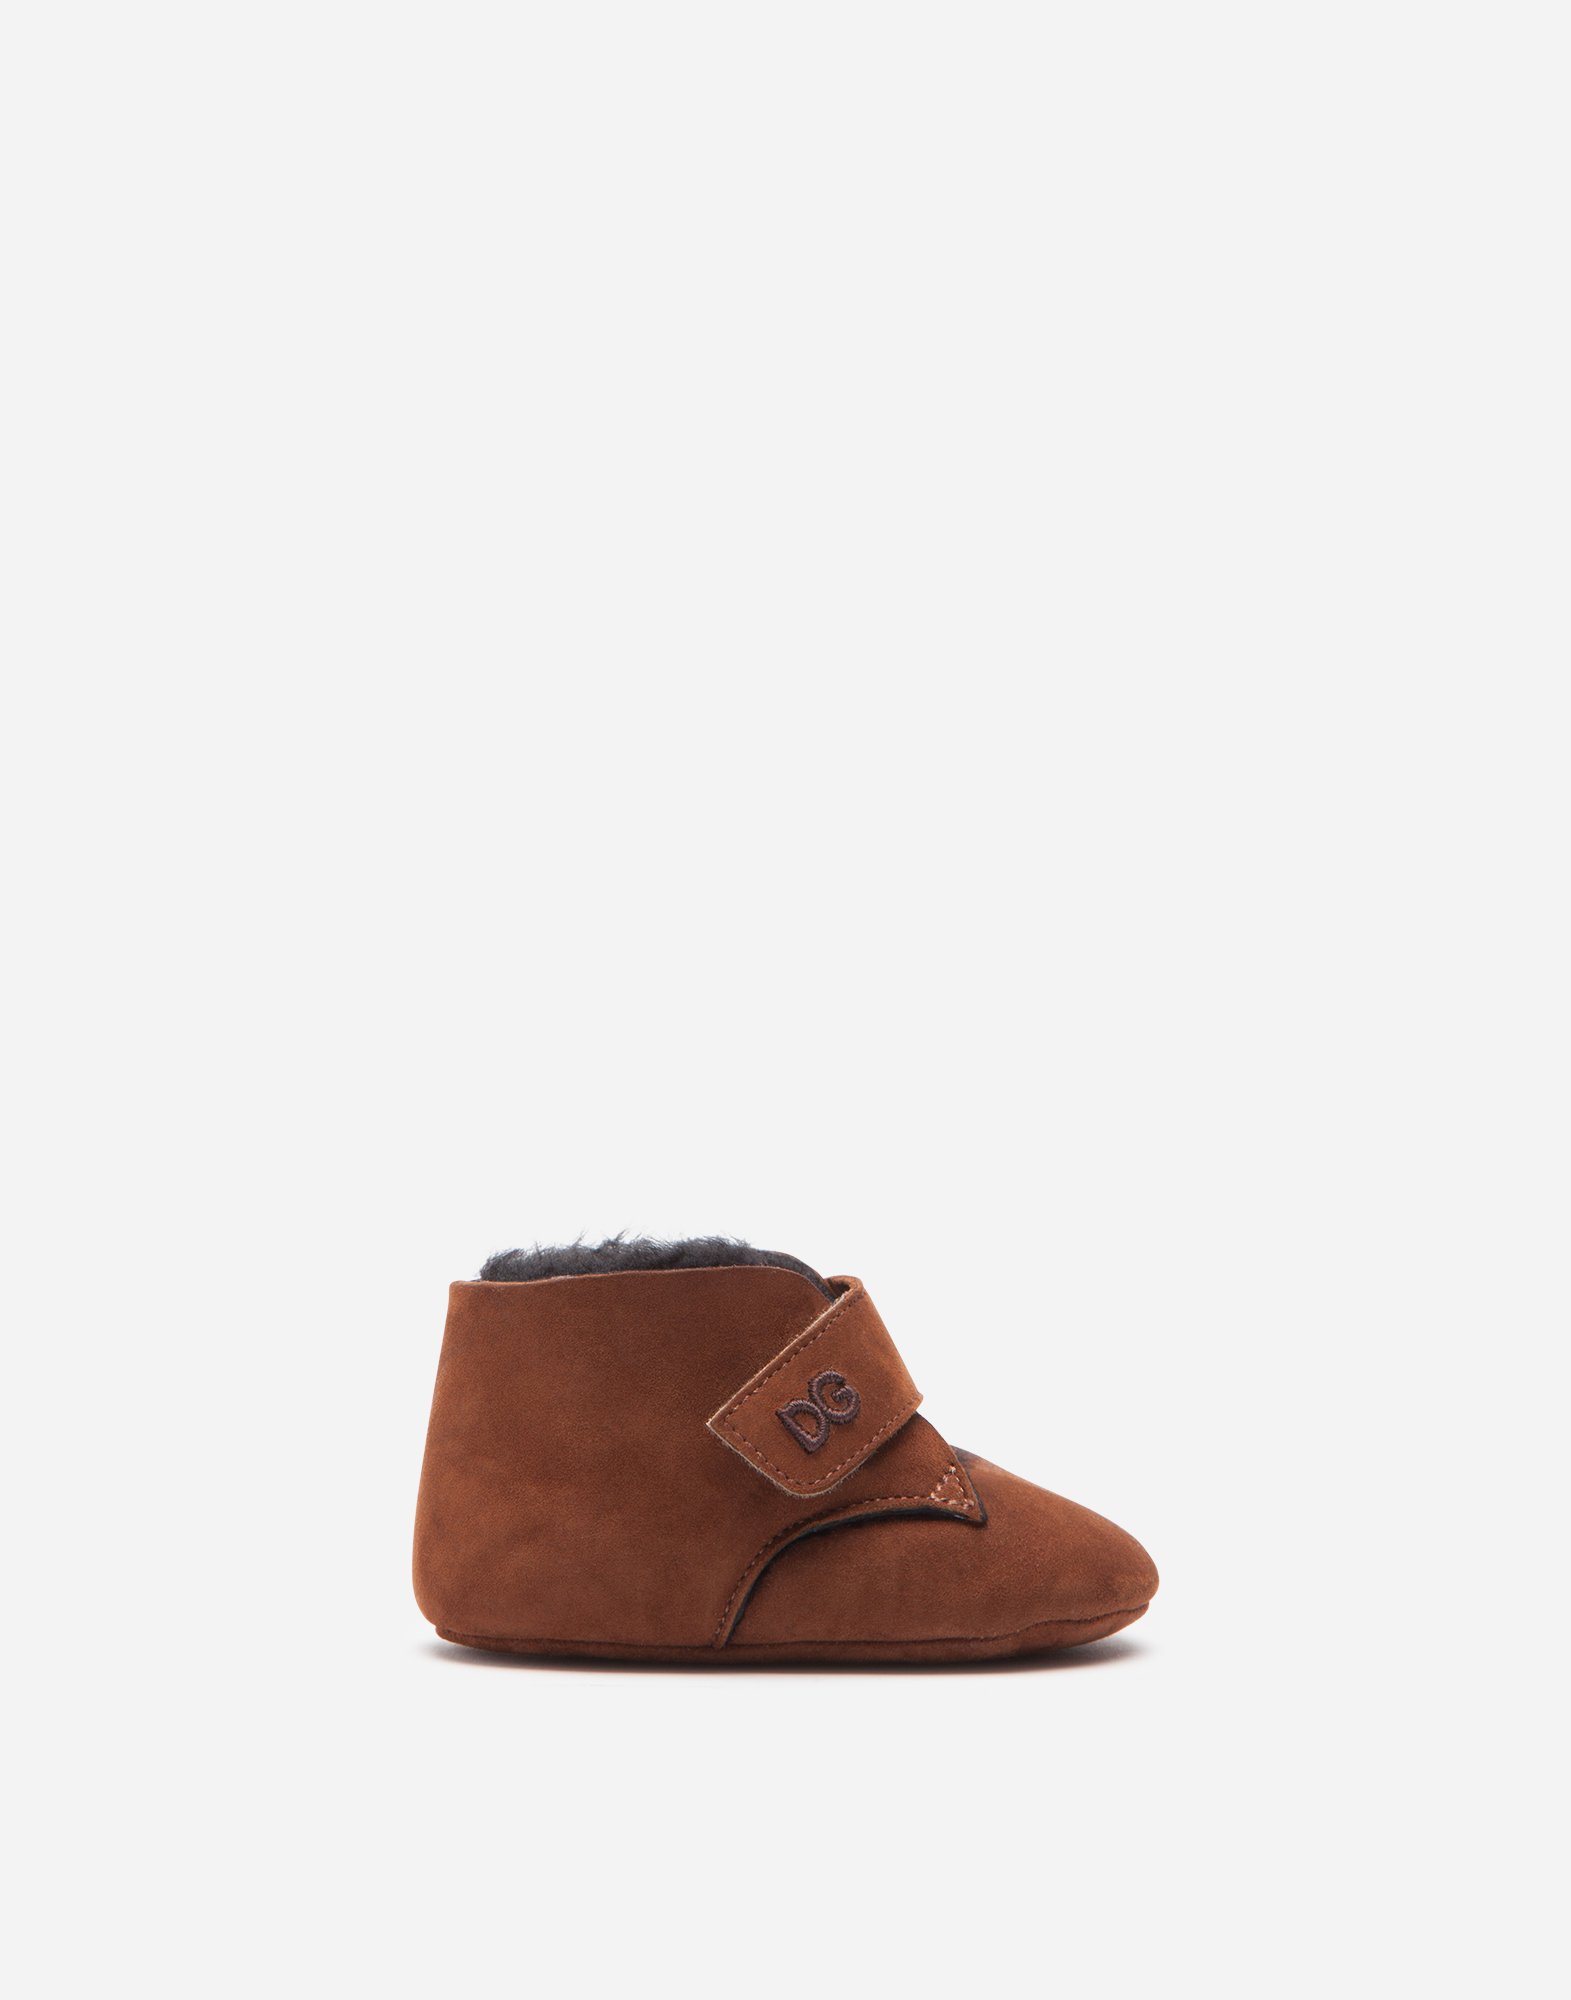 DOLCE & GABBANA Suede booties with DG logo